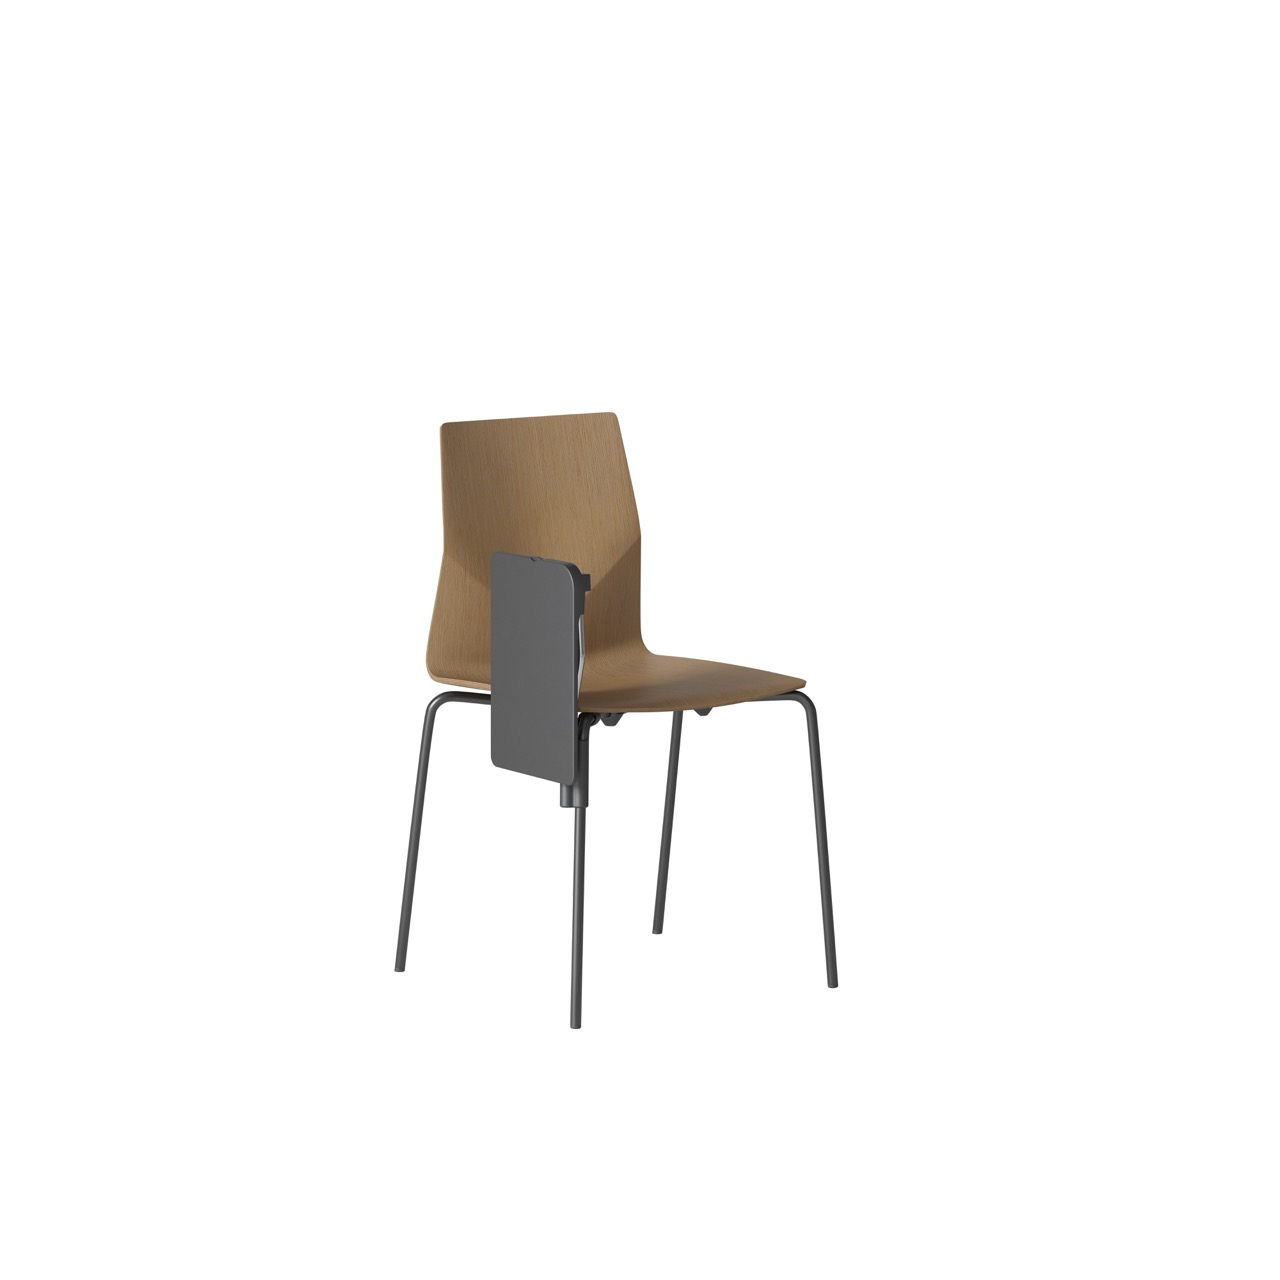 OCEE&FOUR – Chairs – FourCast 2 Four – Veneer shell - Inno Note - Nested - Packshot Image 5 Large